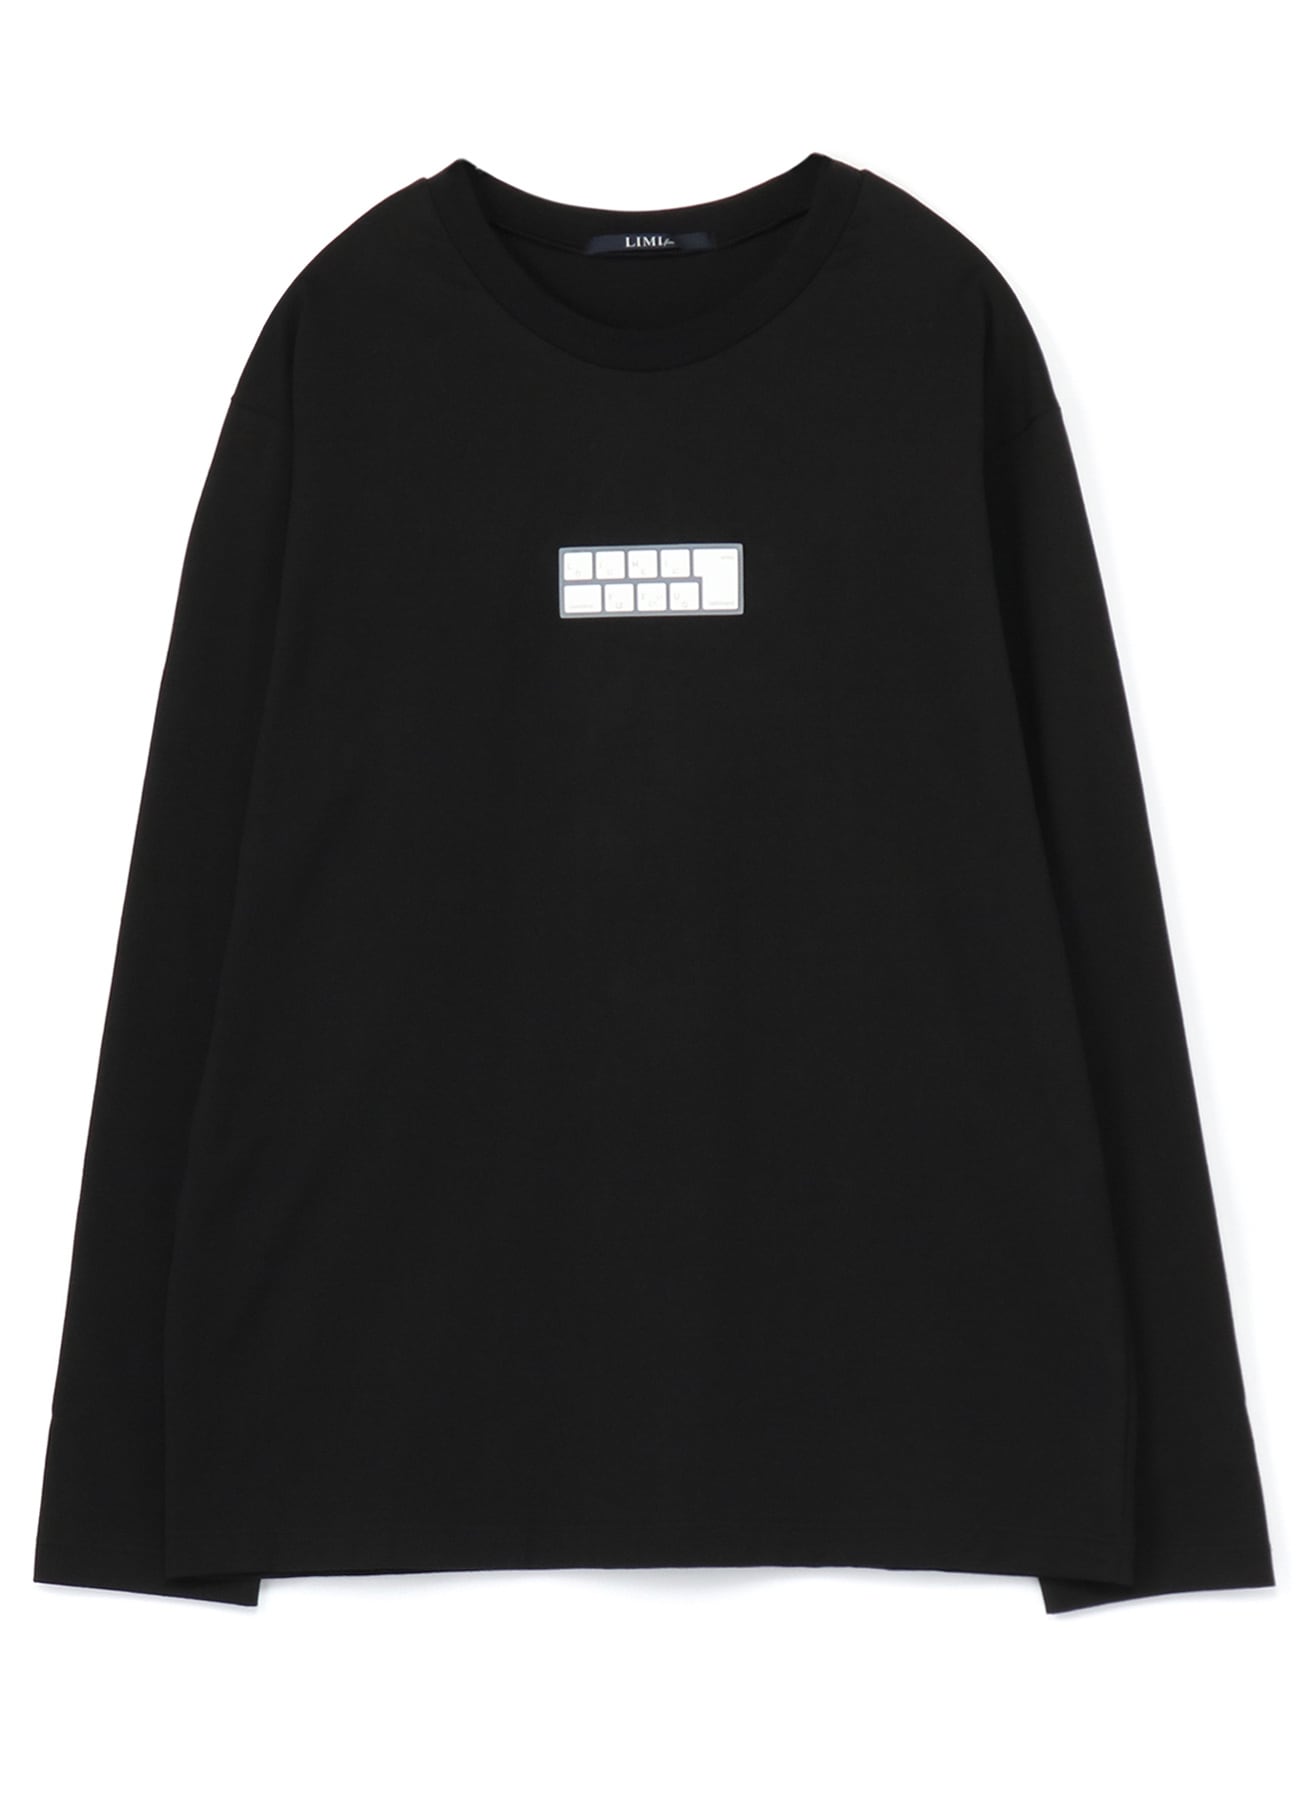 Silicon KeyBoard Oversized Long T-Shirt(S Black): Vintage 1.1｜THE 